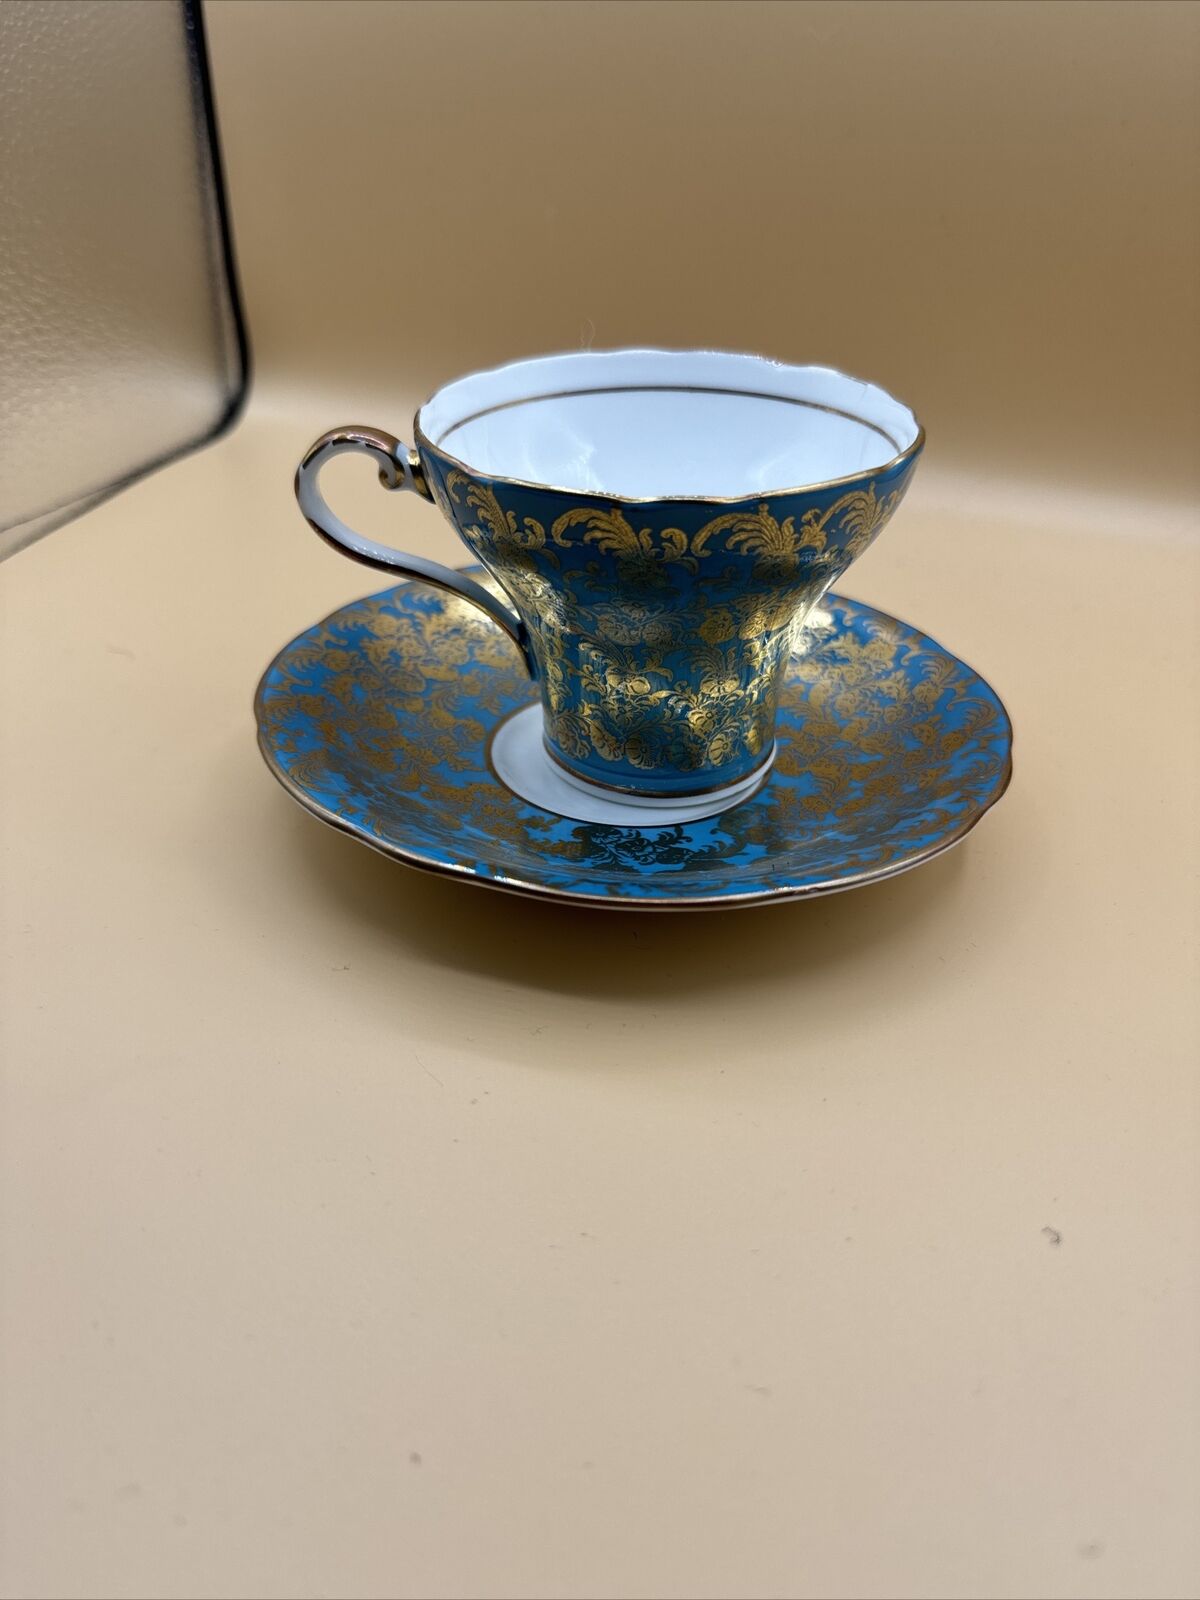 Exquisite Turquoise Aynsley Corsette Teacup and Saucer